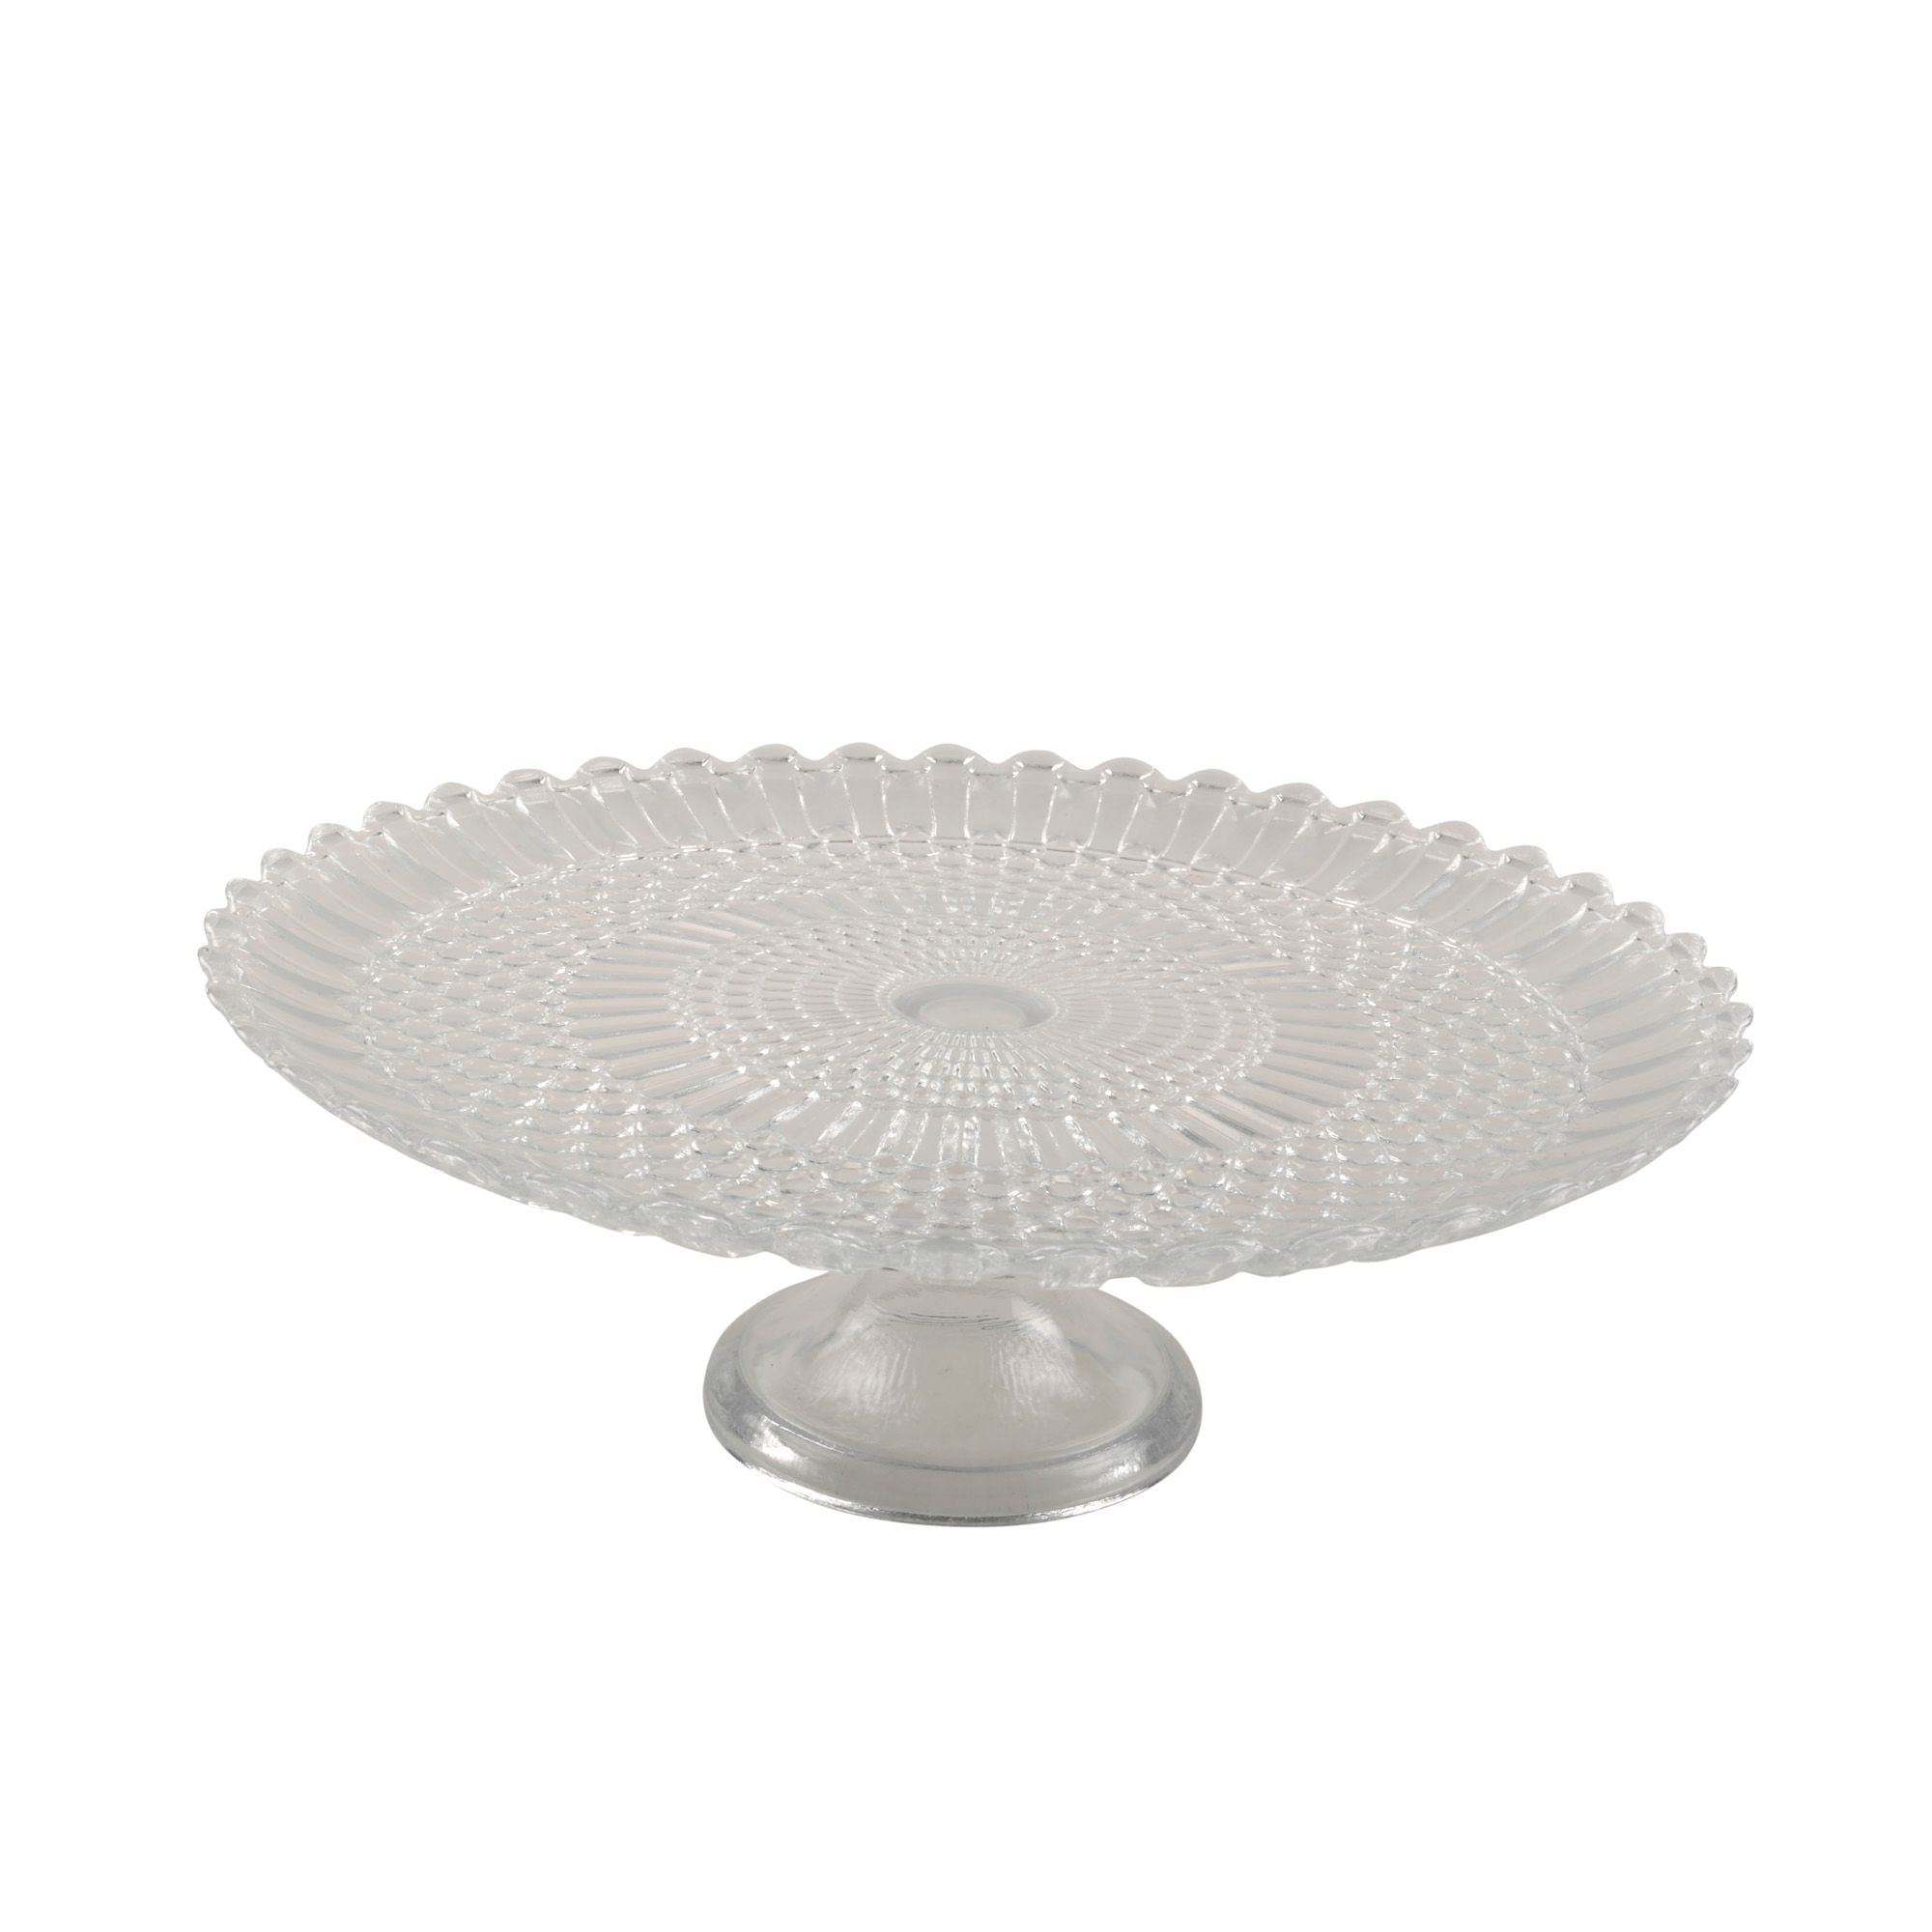 Cake Plate 18cm Kitchen Plate with BELL CAKE STAND Plastic Cake Stand 